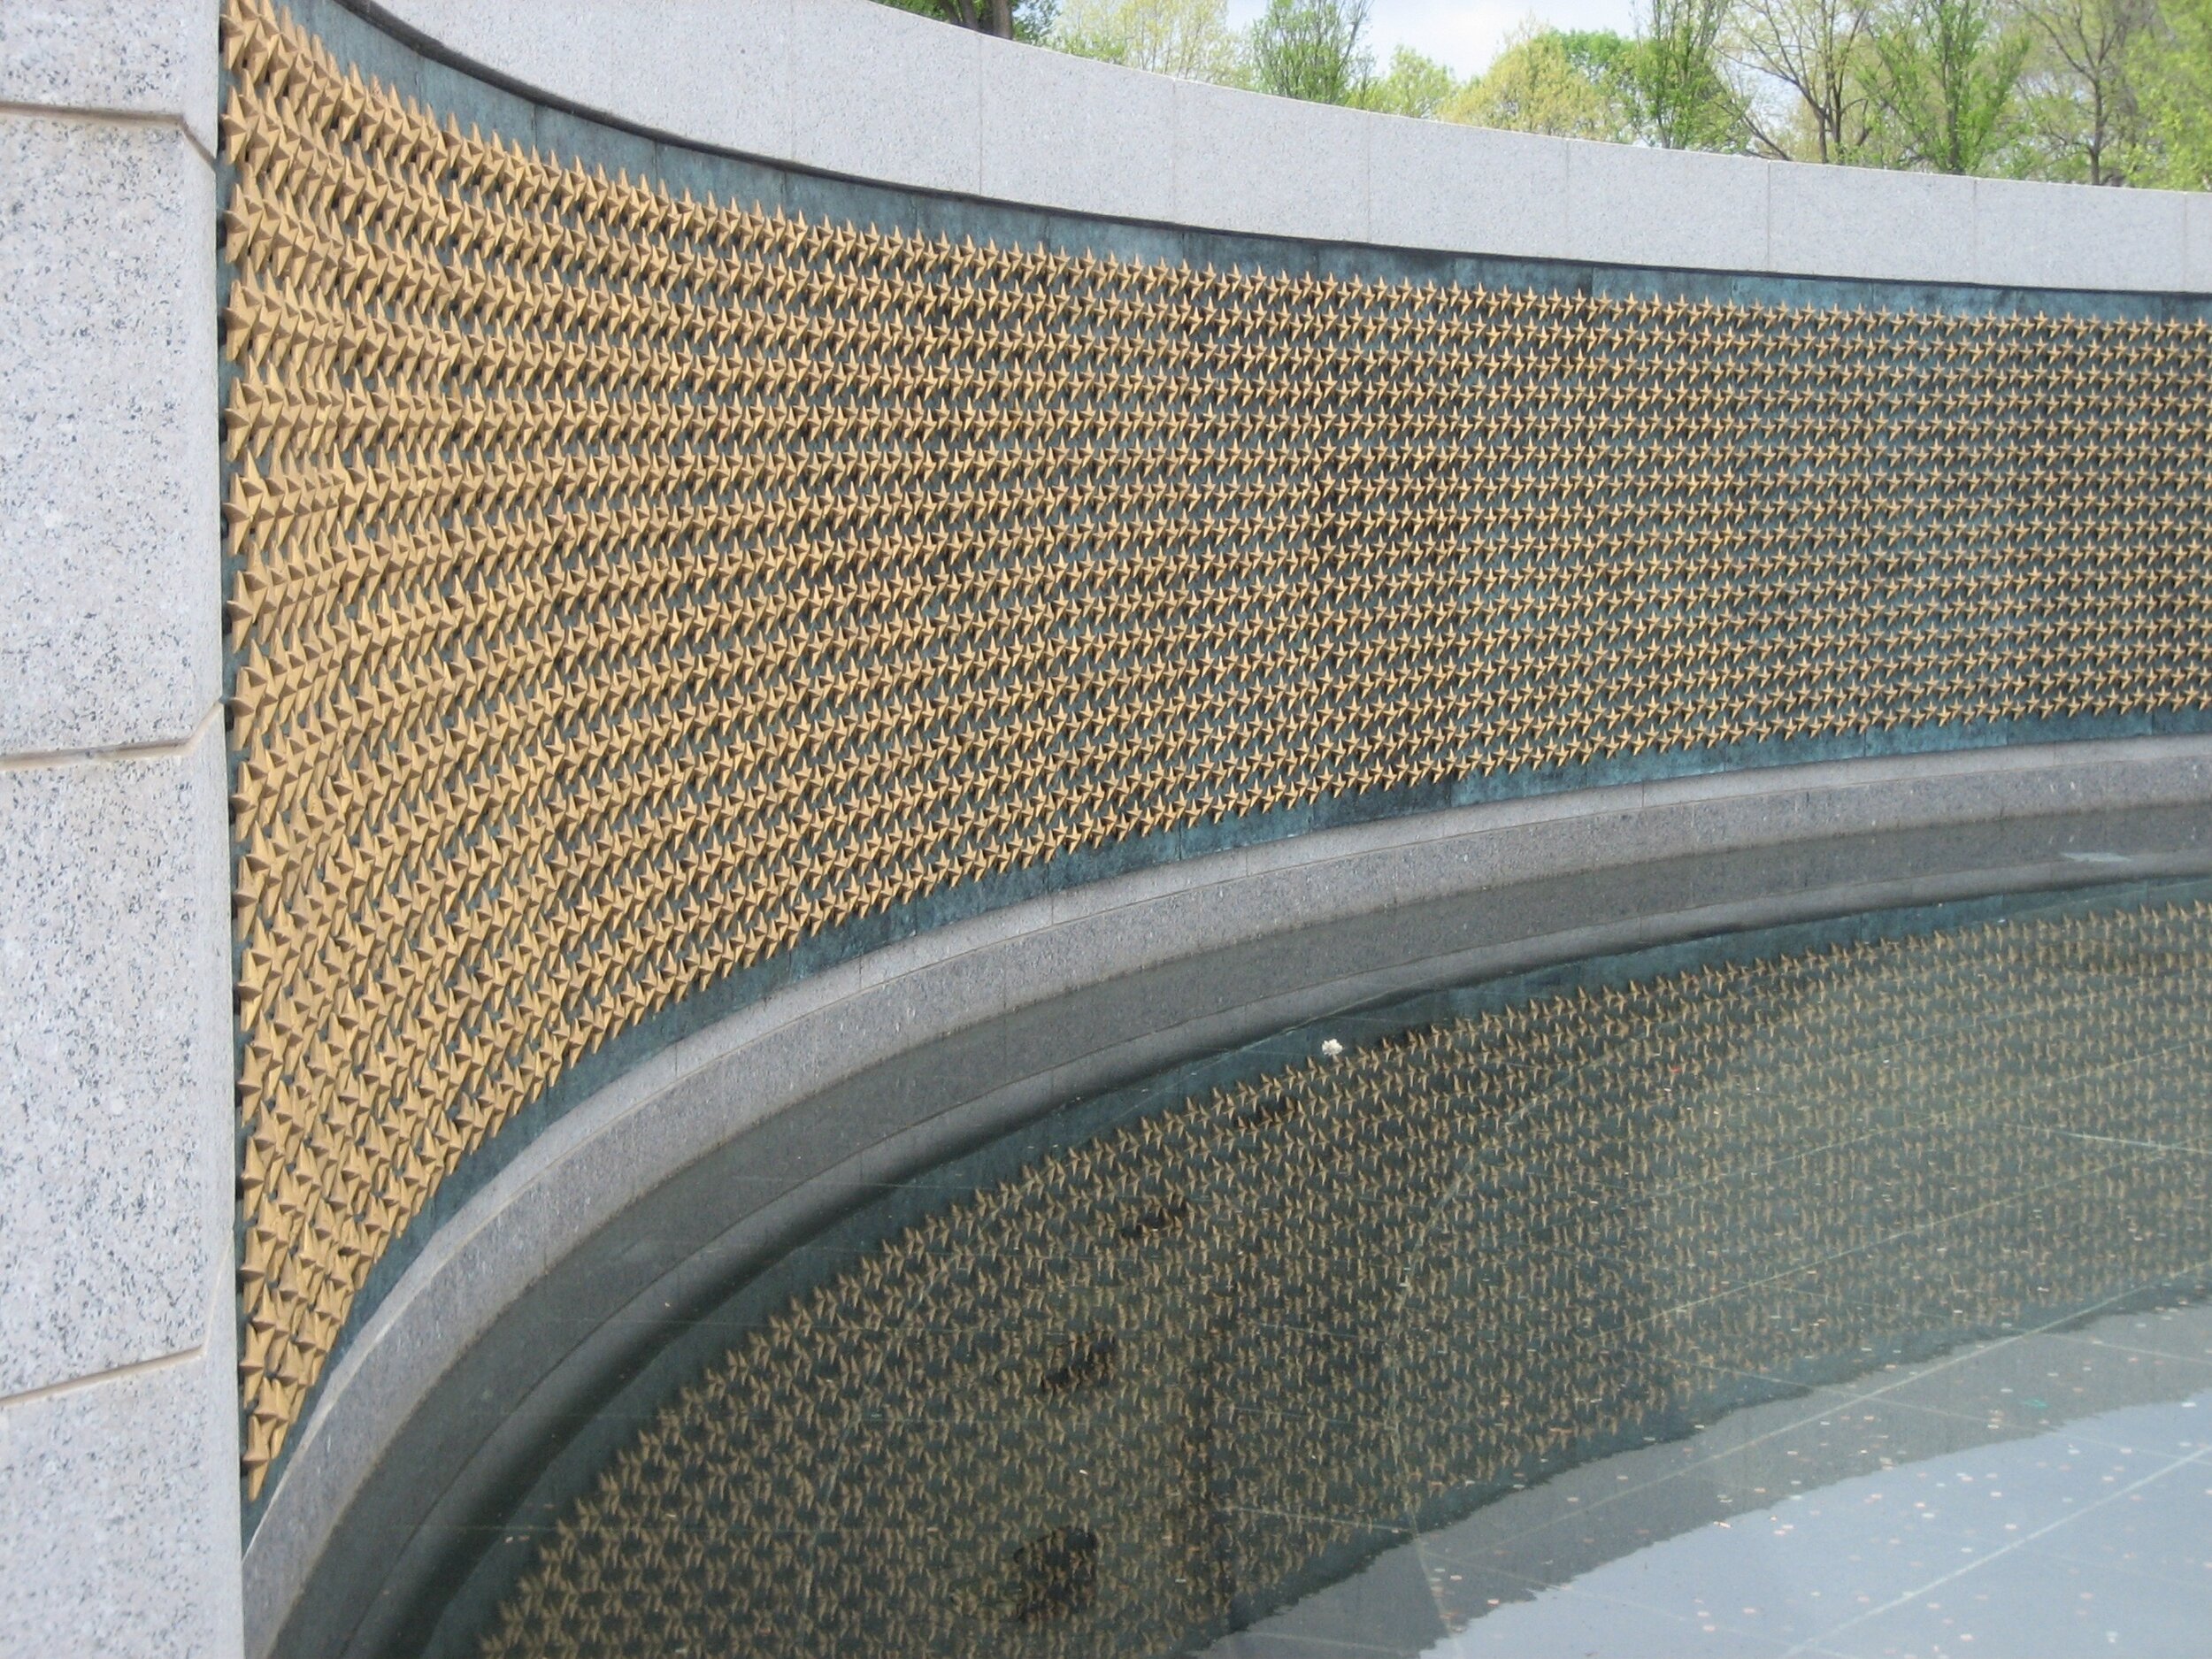 WWII Memorial Gold Star Wall